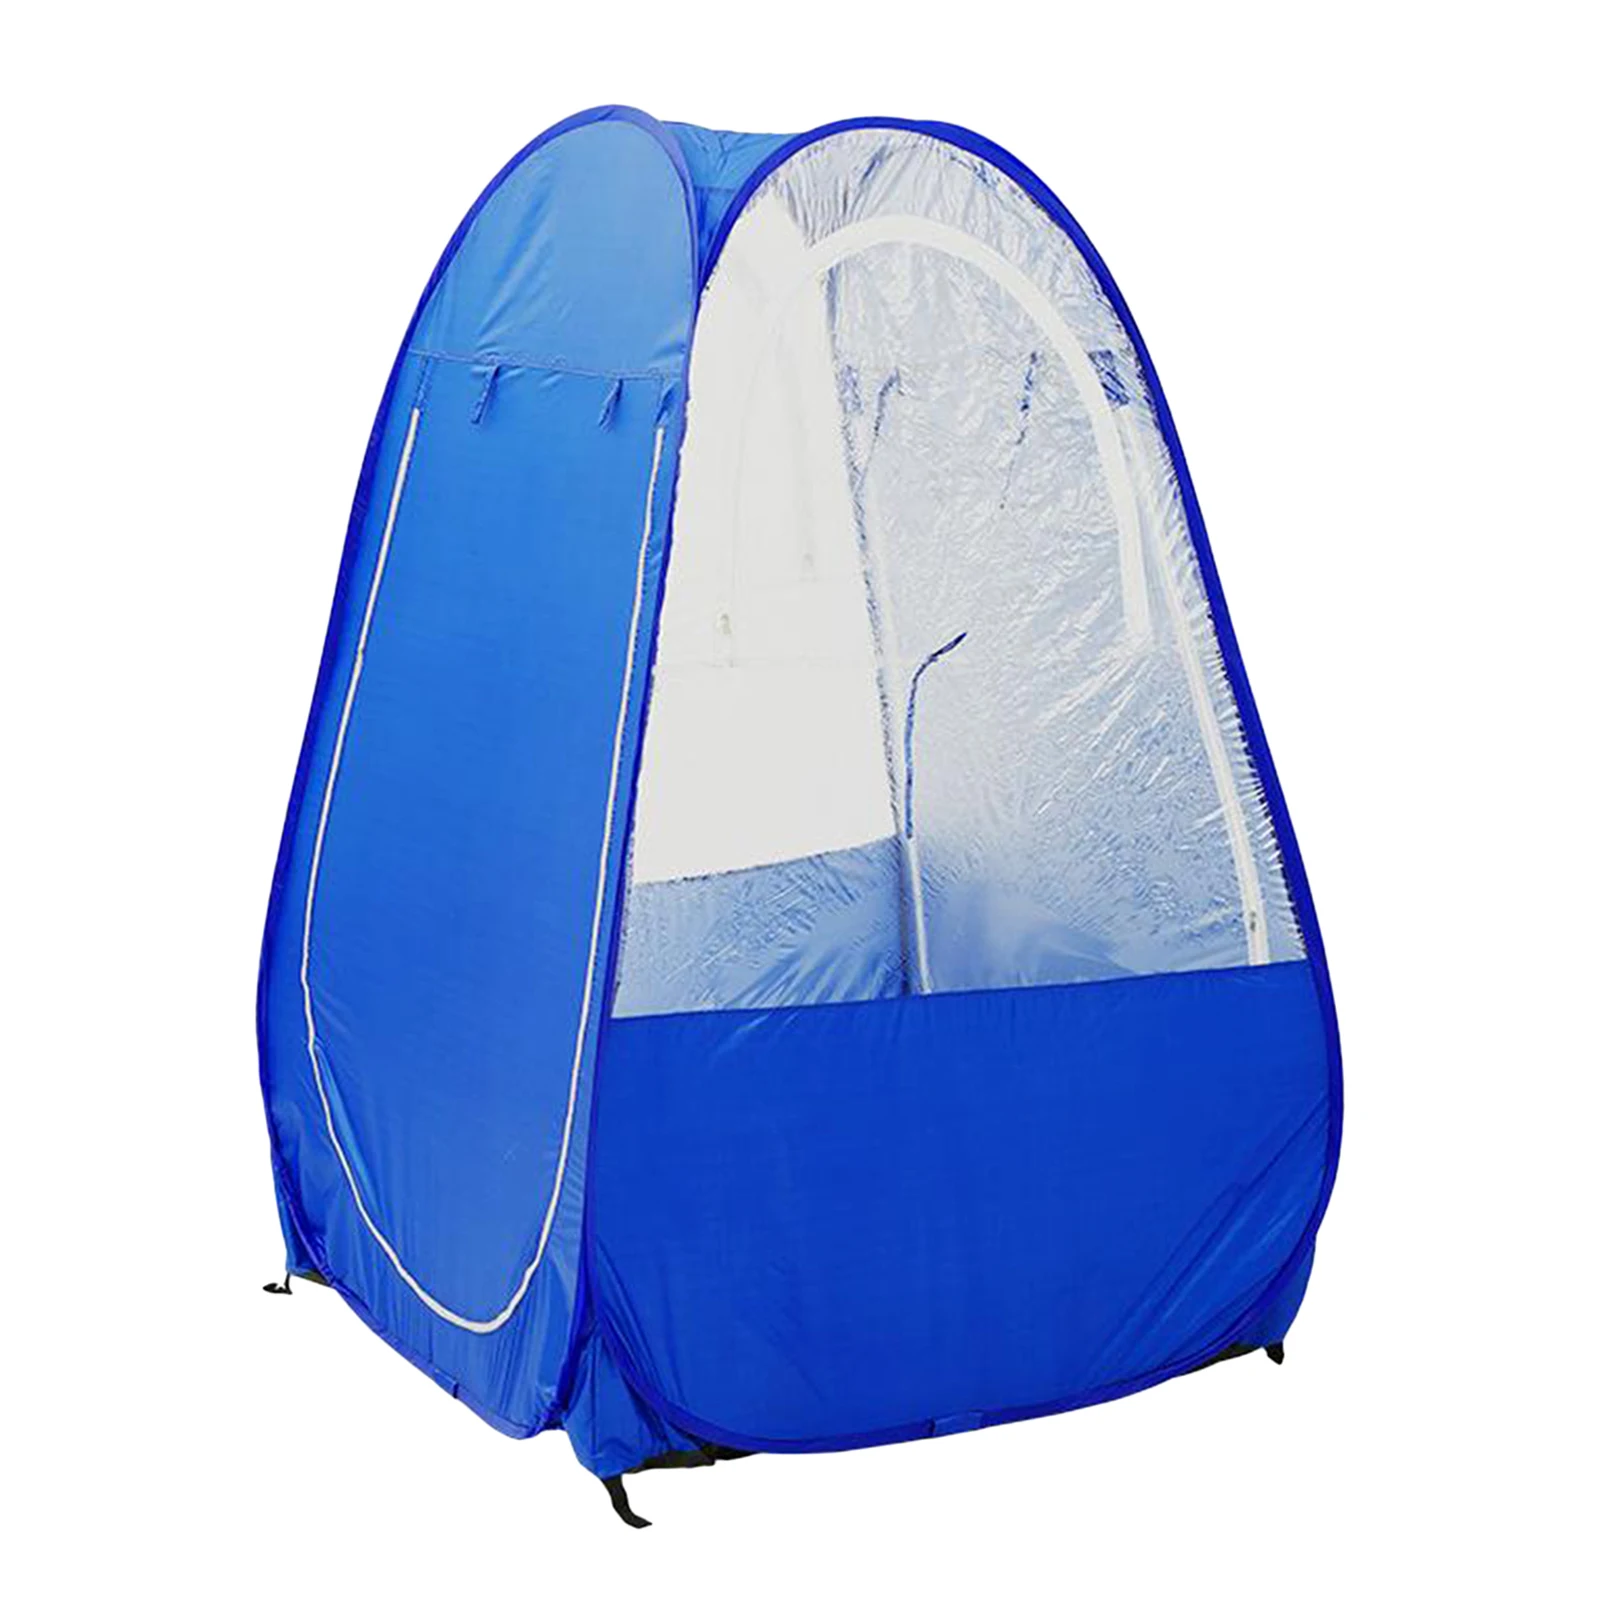 Outdoor Fishing Up Tent Waterproof Anti-UV Winter Warm Tent Quick Automatic Opening One Person Tent Foldable with Carry Bag